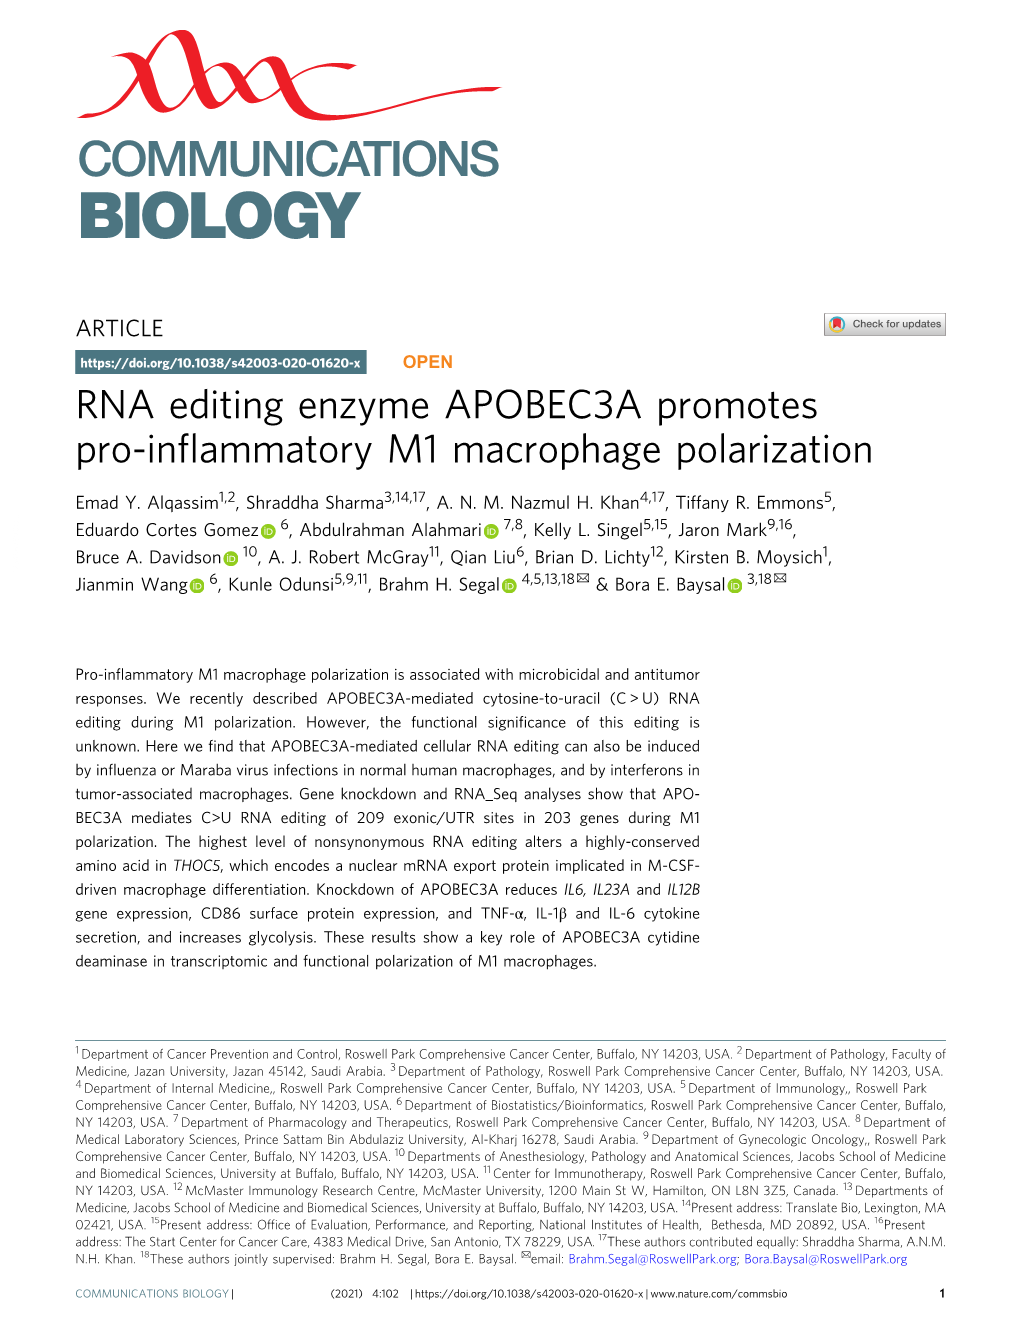 RNA Editing Enzyme APOBEC3A Promotes Pro-Inflammatory M1